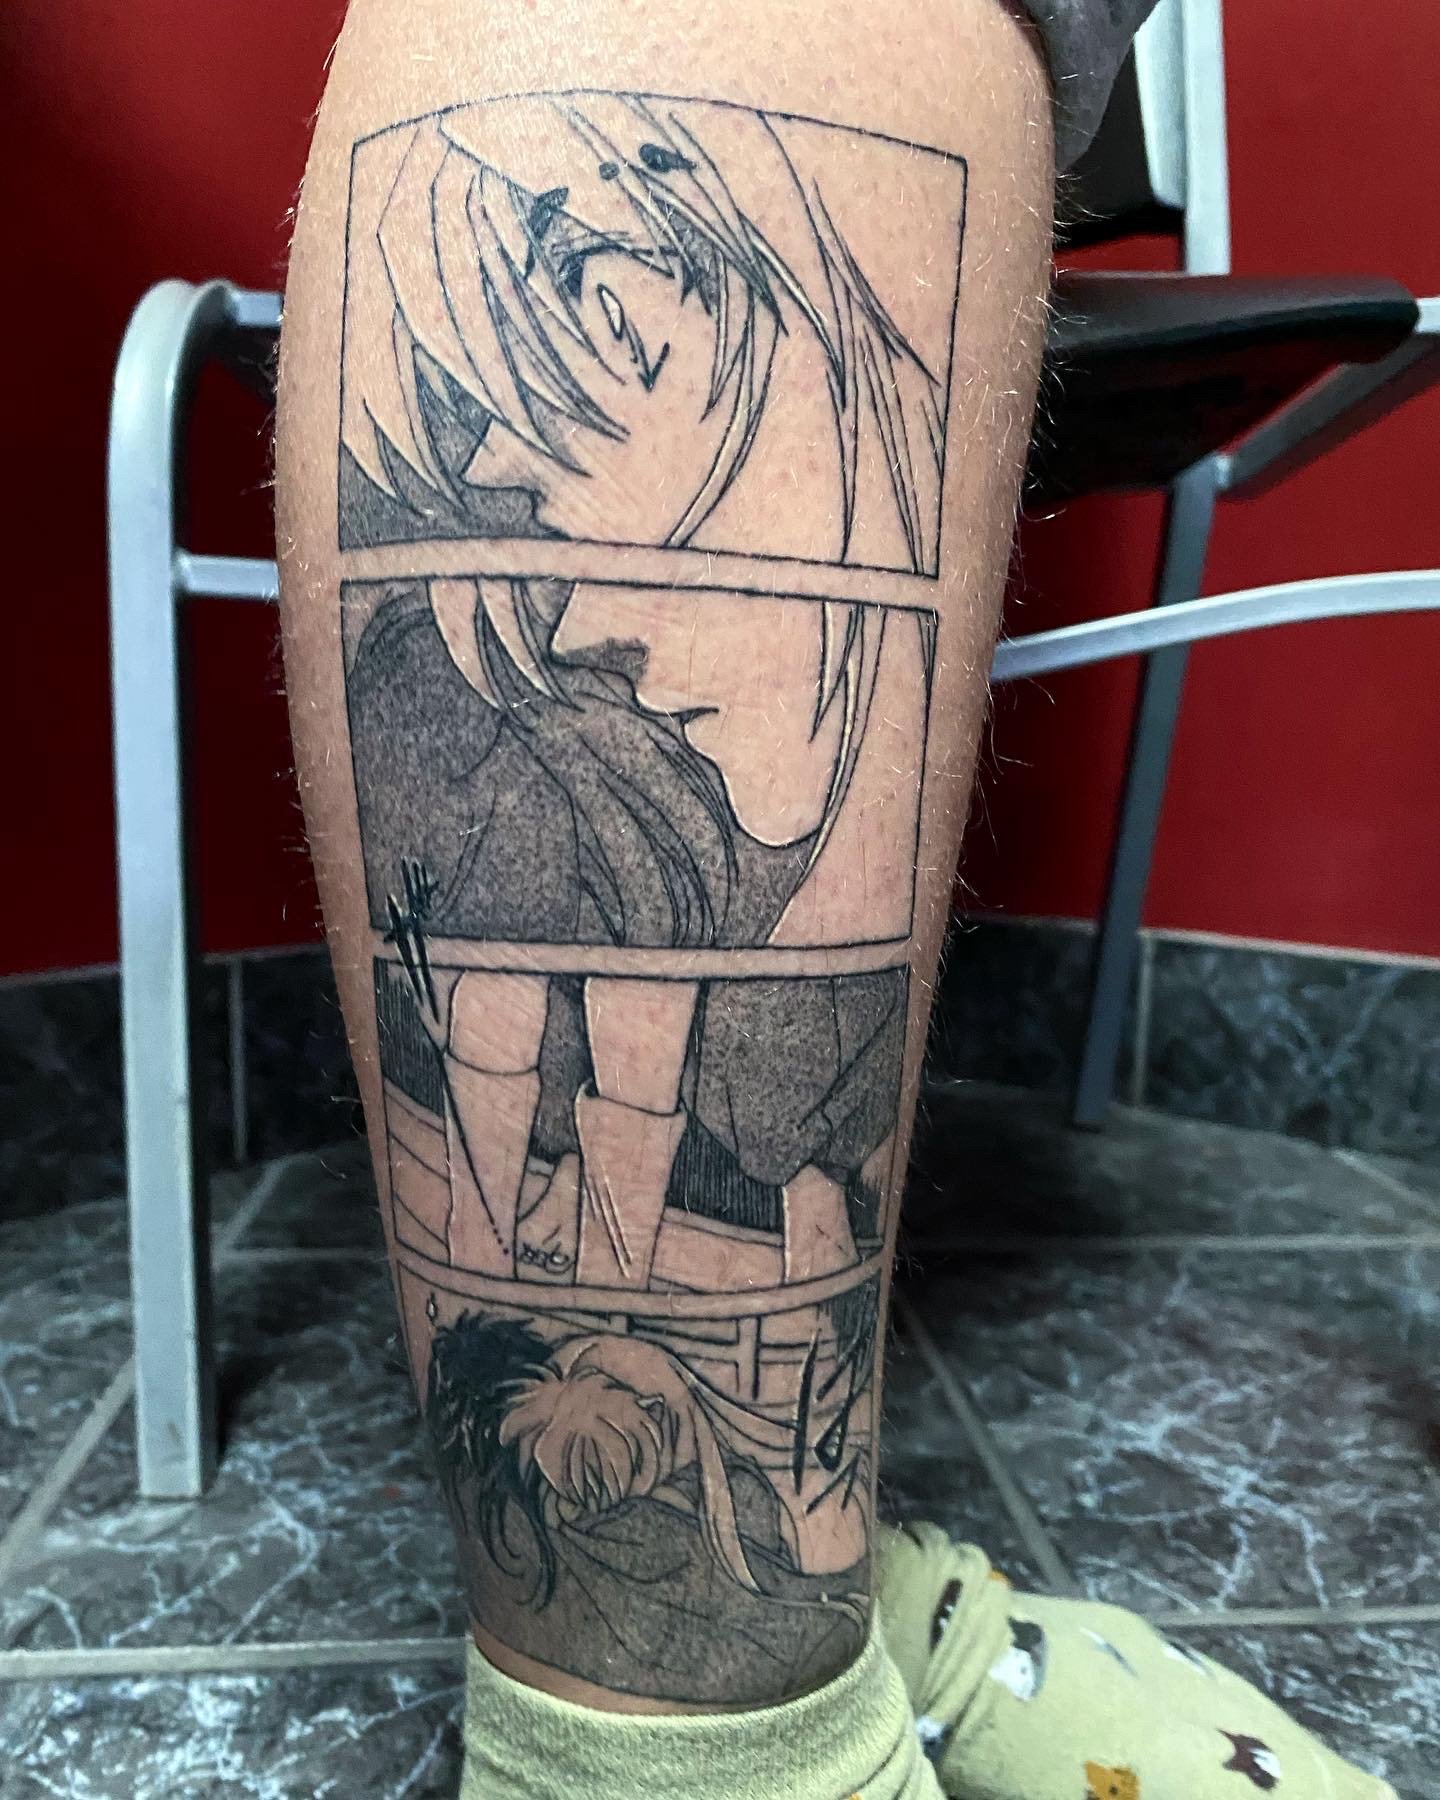 Suski  Anime Gaming Tattoos on Instagram Manga panel from the other day  gengar alakazam Not my original design if anyone knows the original  artist plz let me know so I can